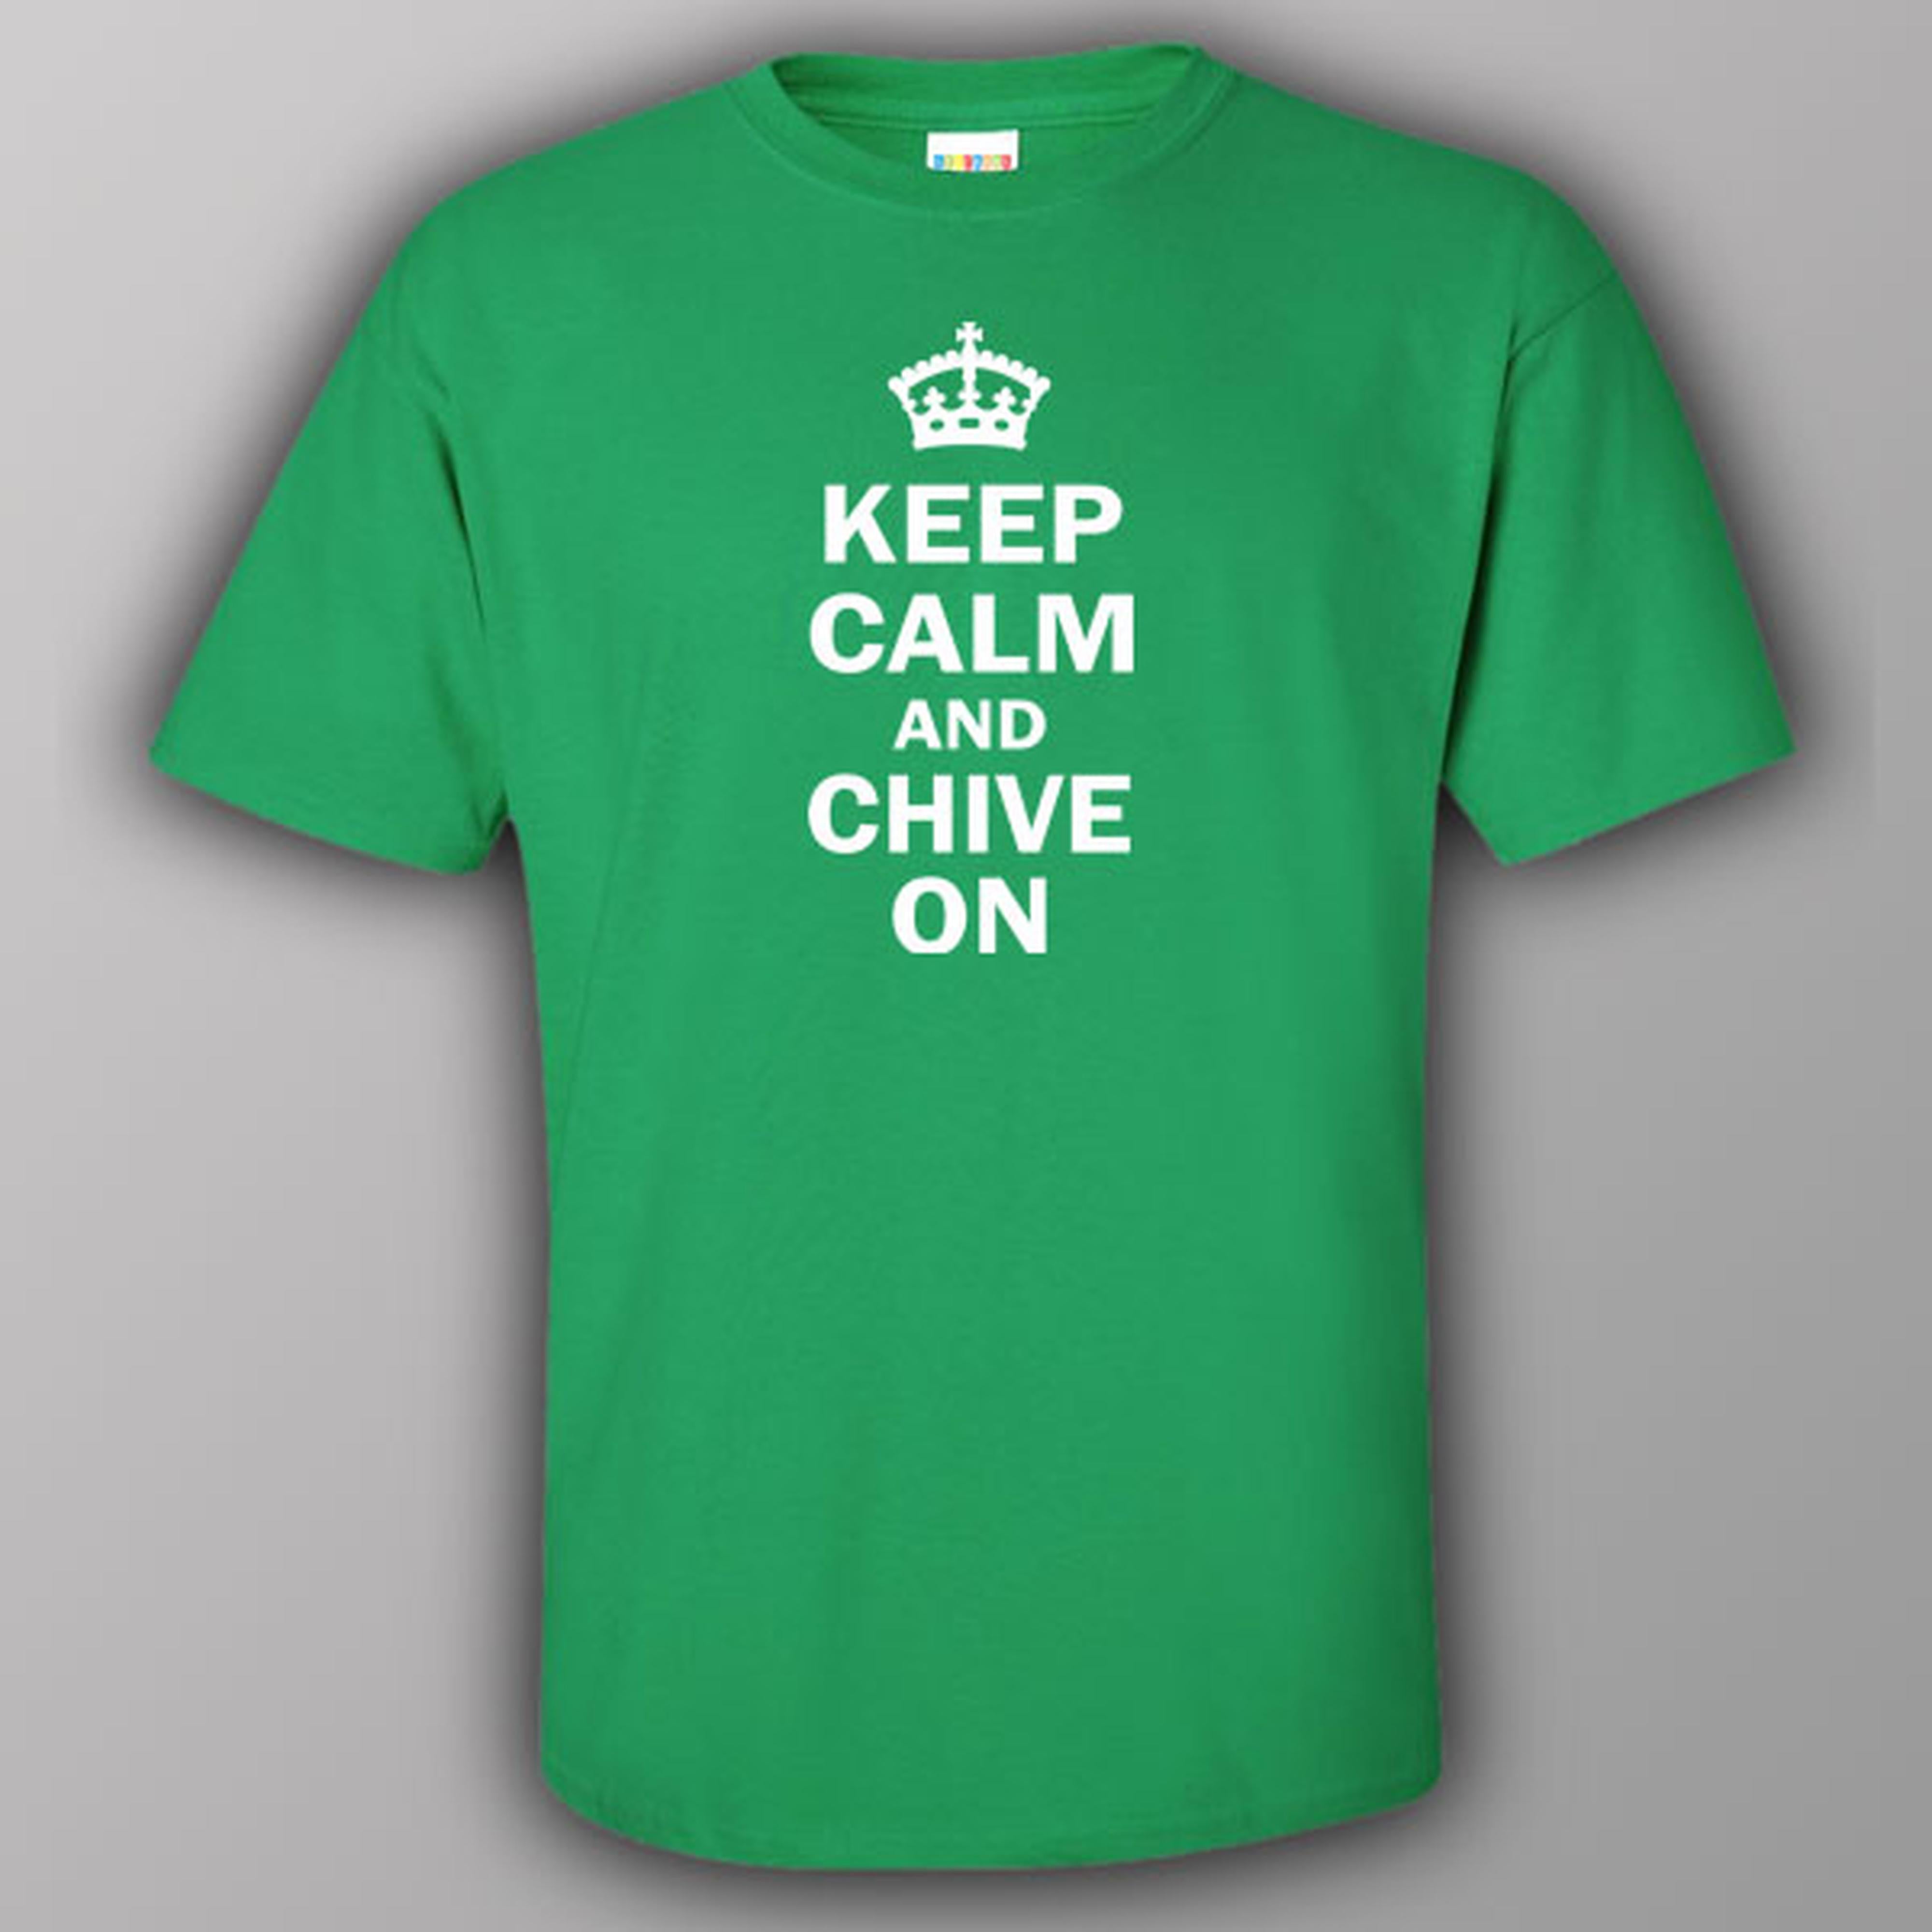 keep-calm-and-chive-on-t-shirt